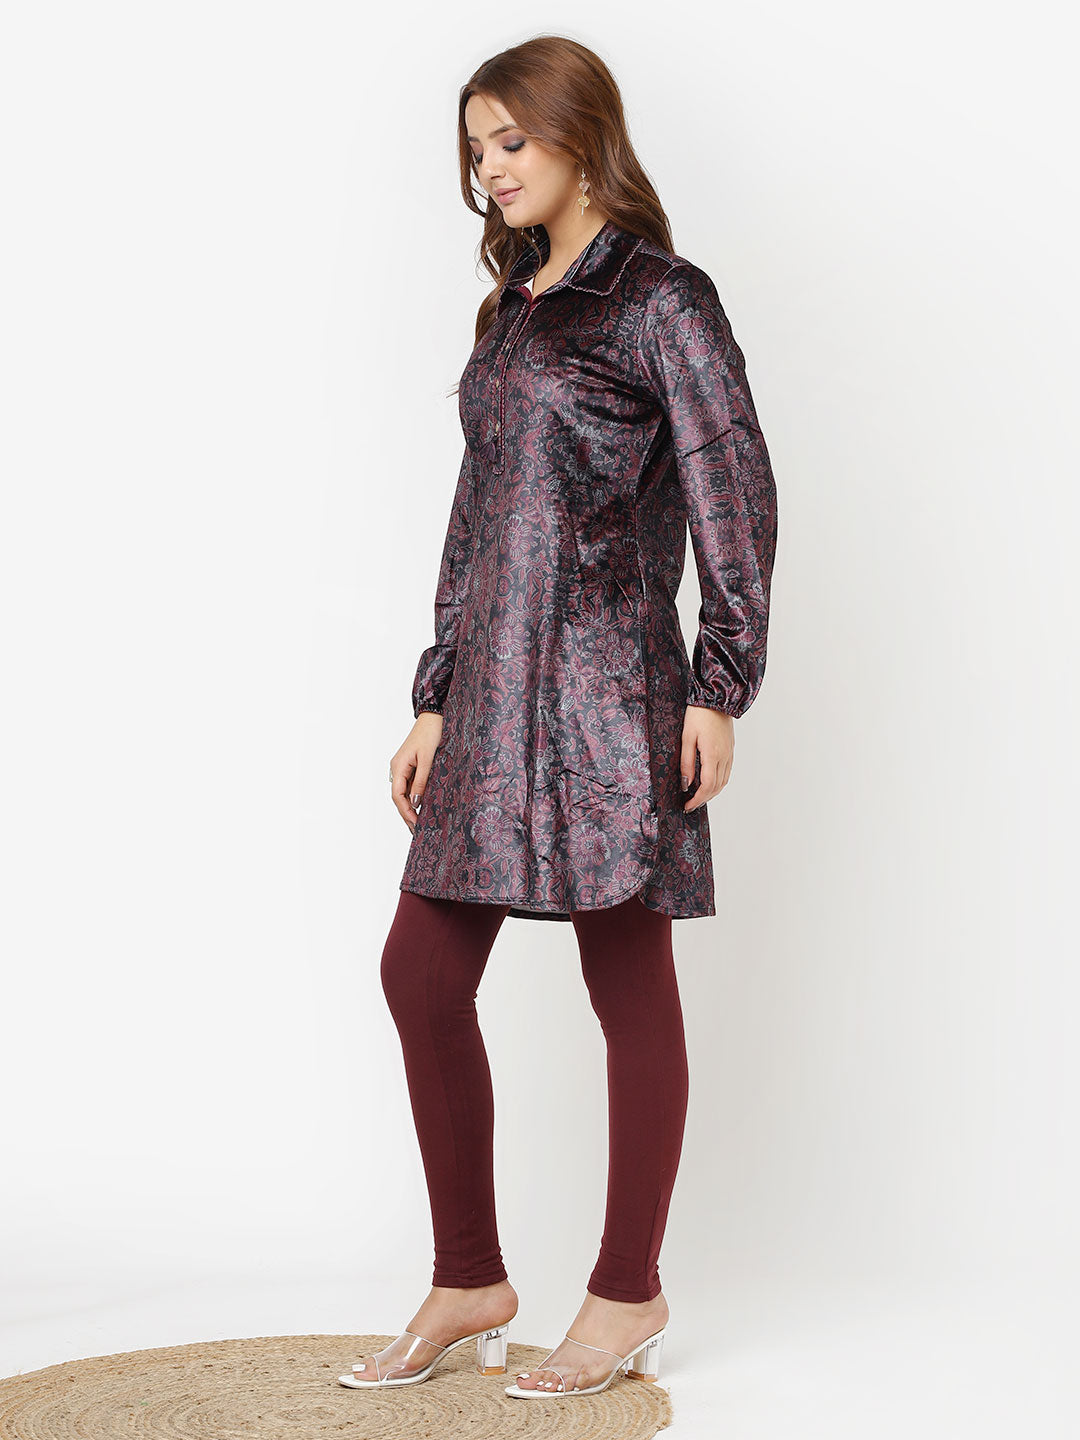 Maroon Printed Velvet Kurti for Women with Classic Collar and Button Detailing